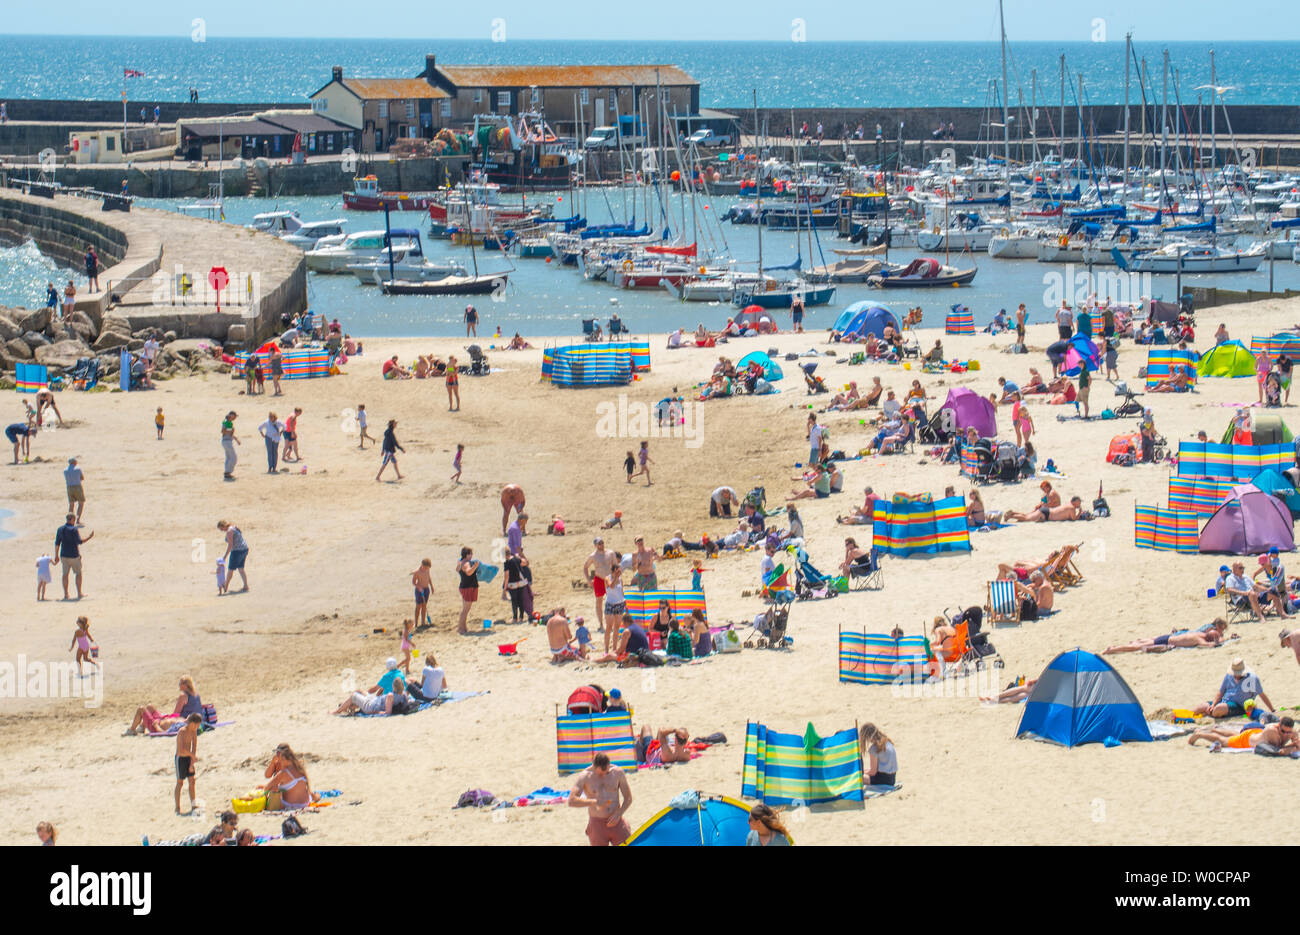 Lyme Regis, Dorset, UK. 27th June 2019. UK Weather: Sunseekers flock to the picturesque seaside resort of Lyme Regis to soak up the scorching hot sunshine and bright blue skies as the Saharan heatwave hits the UK. Visitors and locals bask in sweltering sun on the town's sandy beach. Credit: Celia McMahon/Alamy Live News. Stock Photo